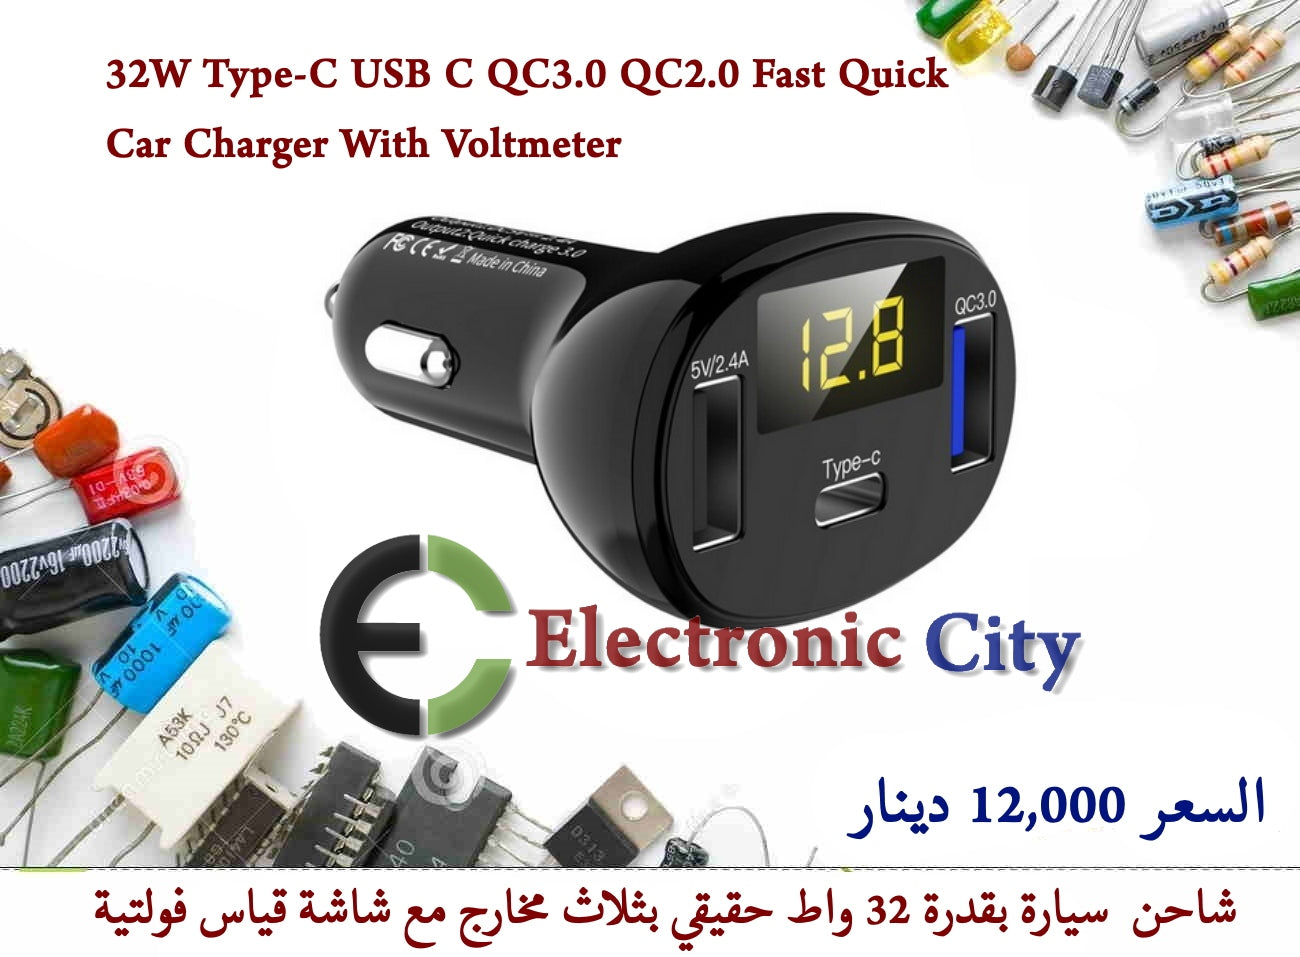 32W Type-C USB C QC3.0 QC2.0 Fast Quick Car Charger With Voltmeter